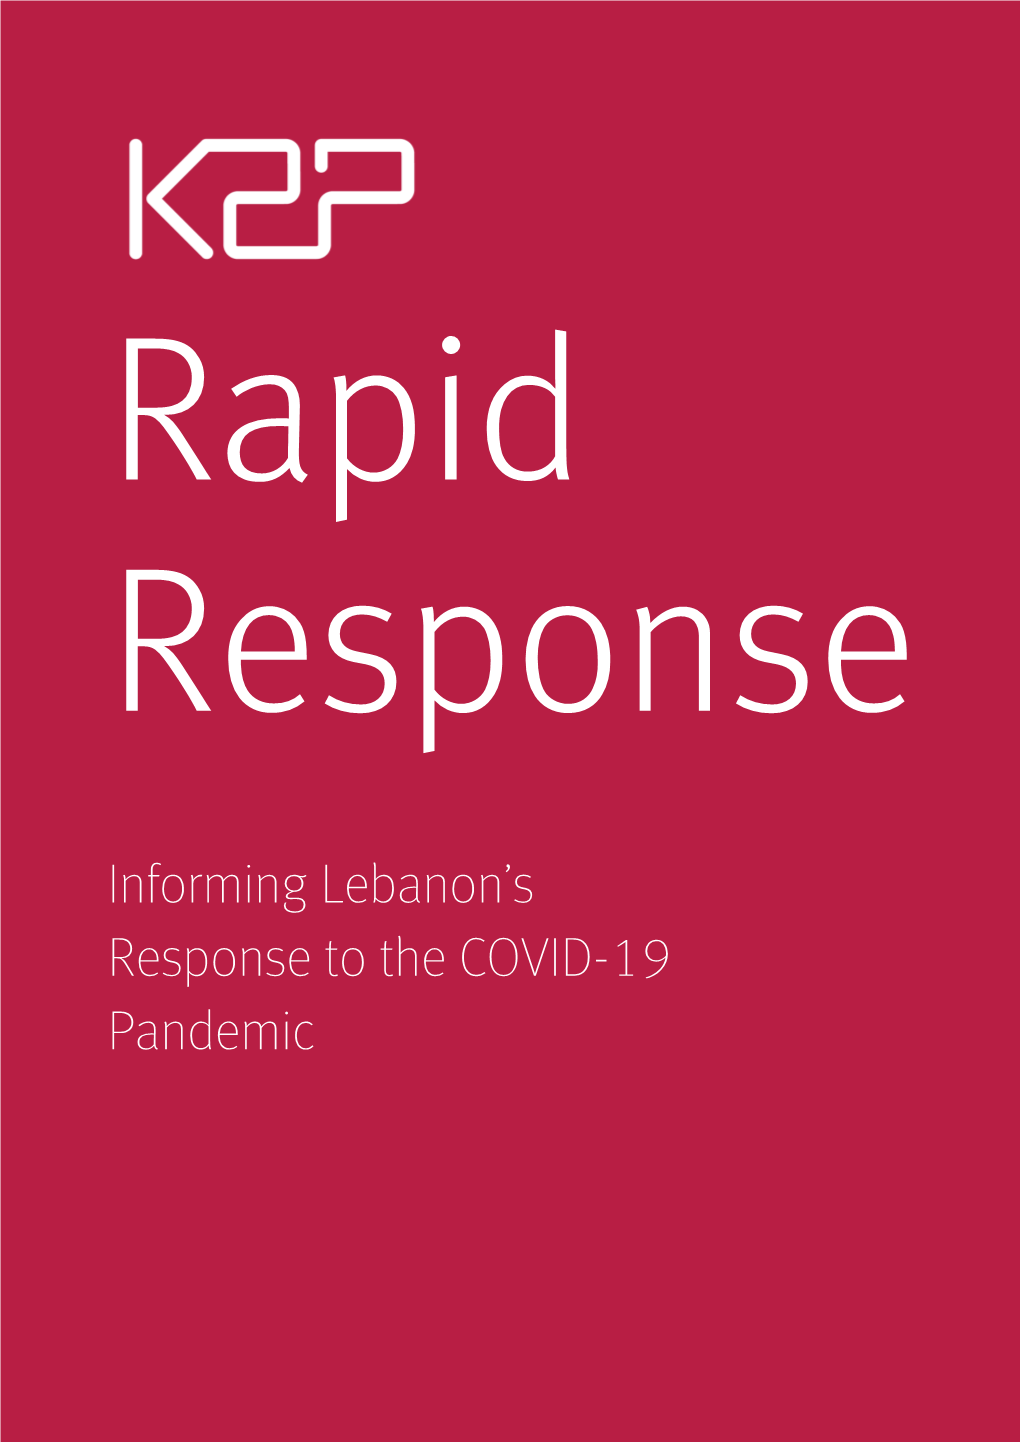 Informing Lebanon's Response to the COVID-19 Pandemic